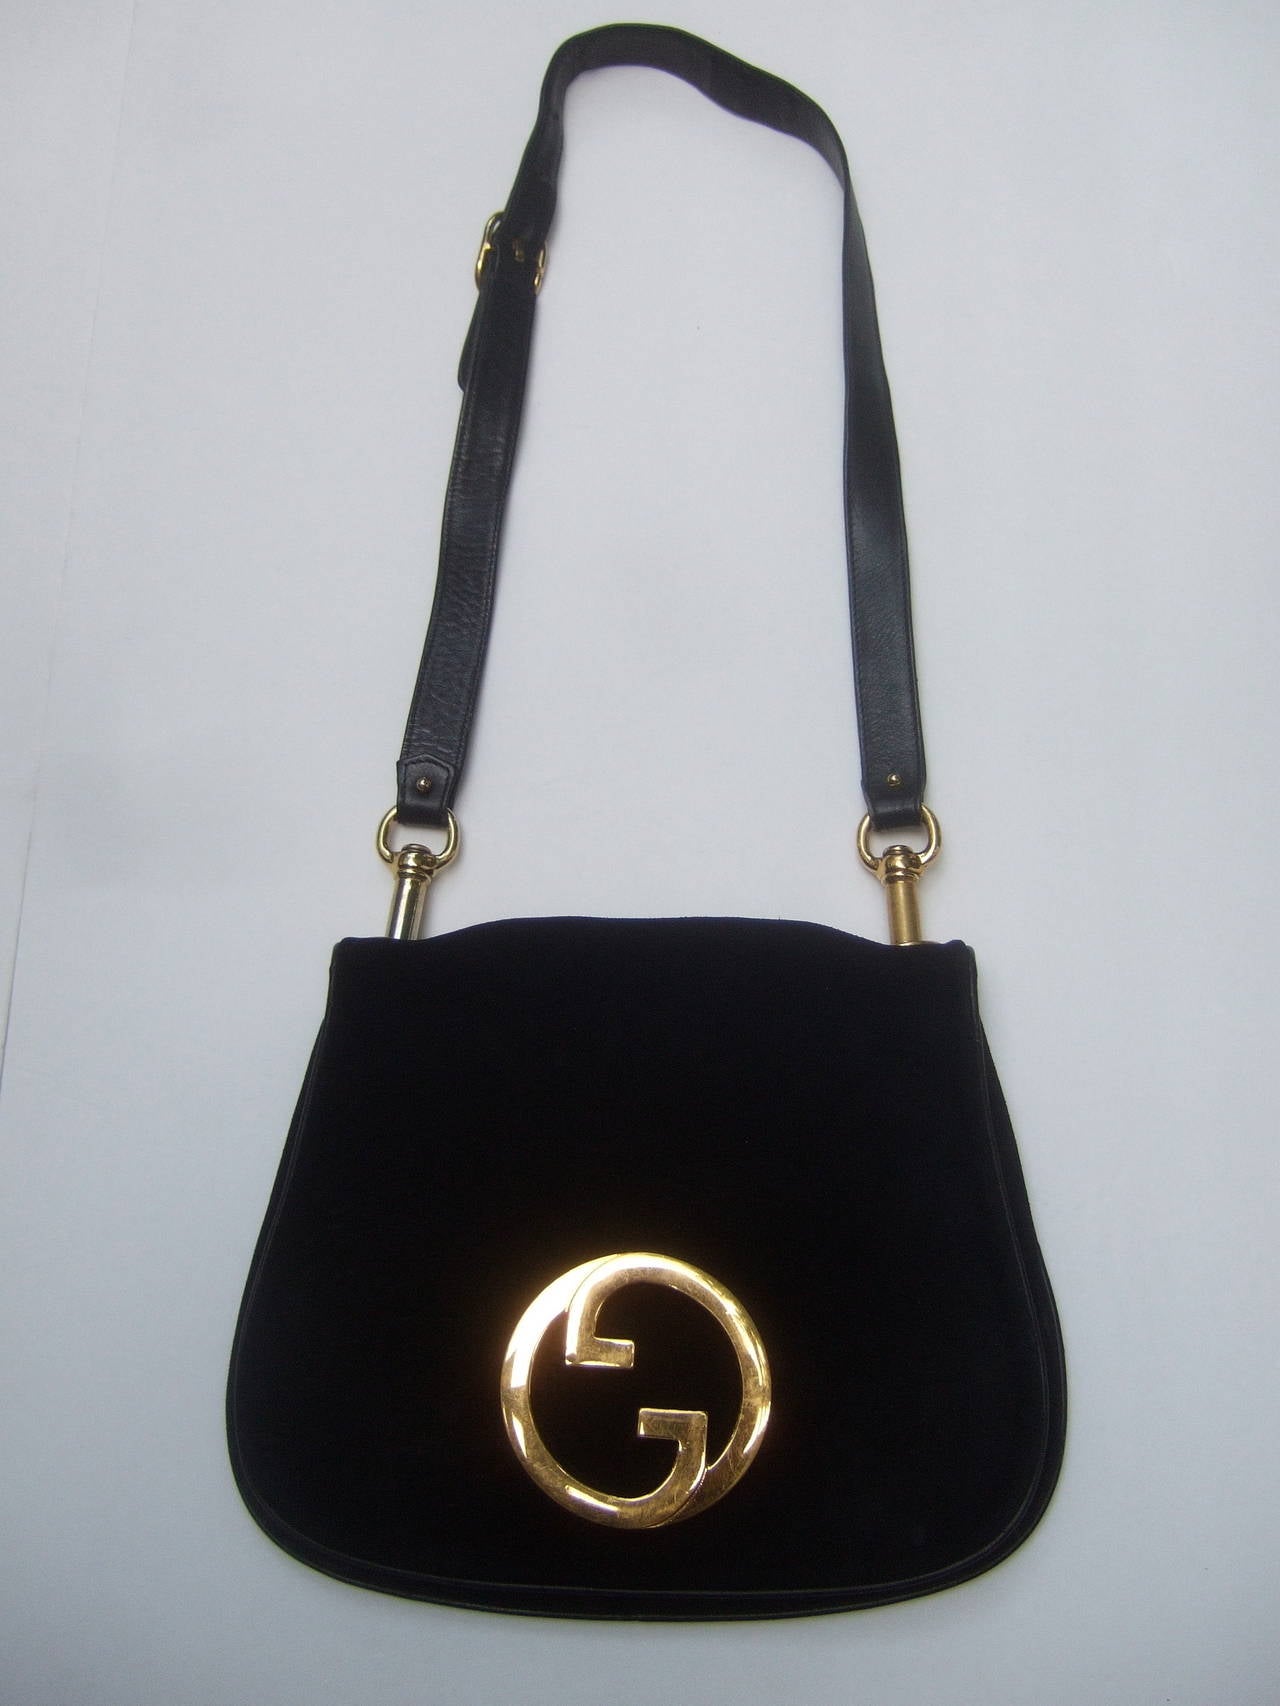 Gucci Italy Sleek black suede doeskin suede shoulder bag x 1970
The chic Italian handbag is covered with plush black suede
The front cover is adorned with Gucci's massive gilt metal
interlocked G.G. initials 

The iconic Gucci blondie shoulder